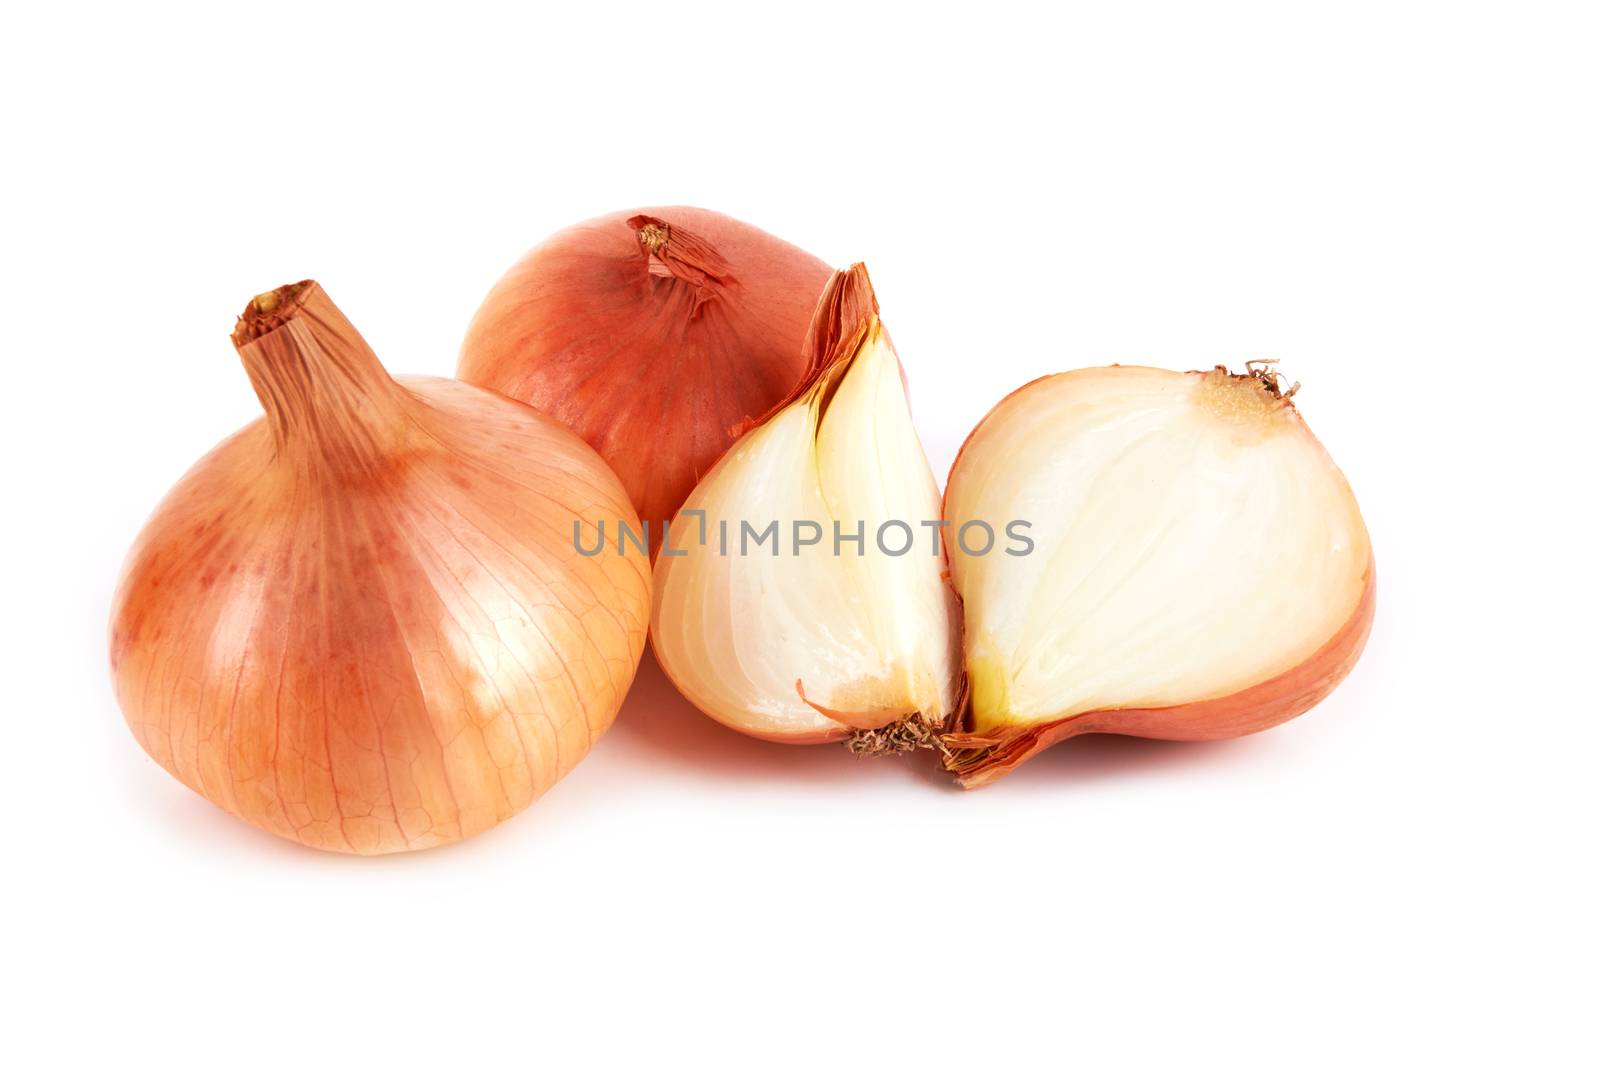 onion by pioneer111